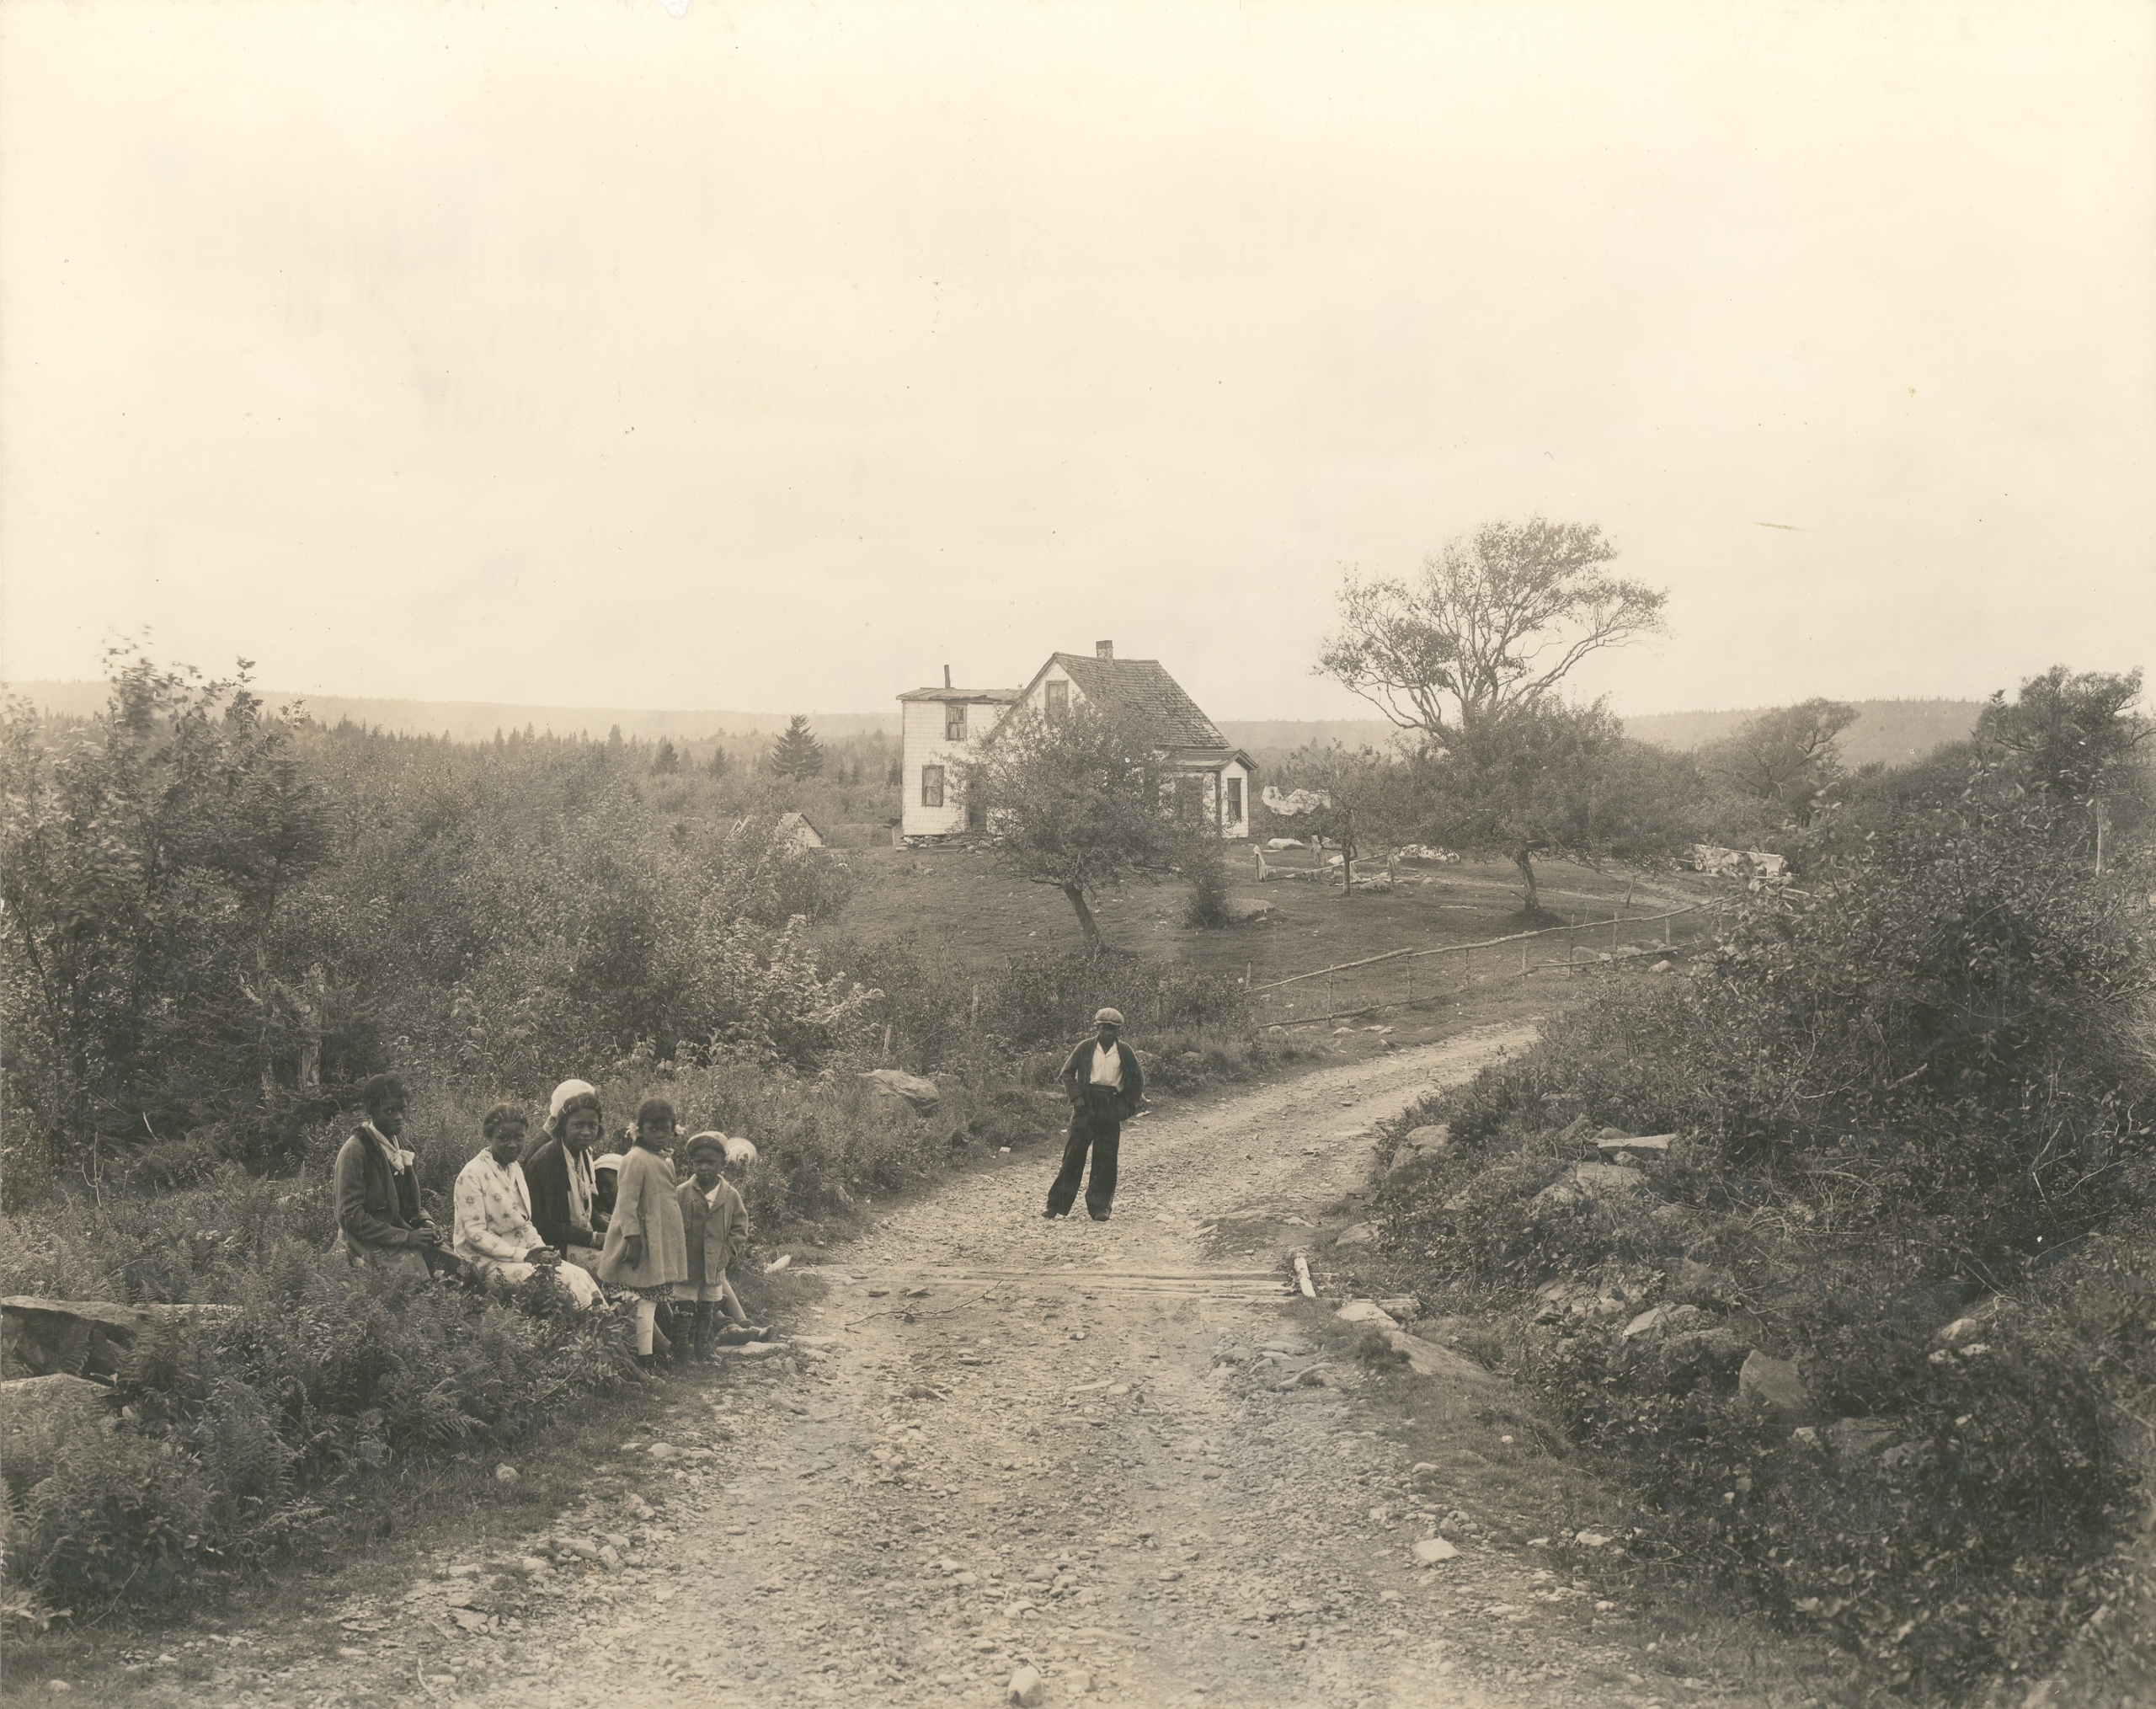 A group of children on a dirt road, with a building in the background.